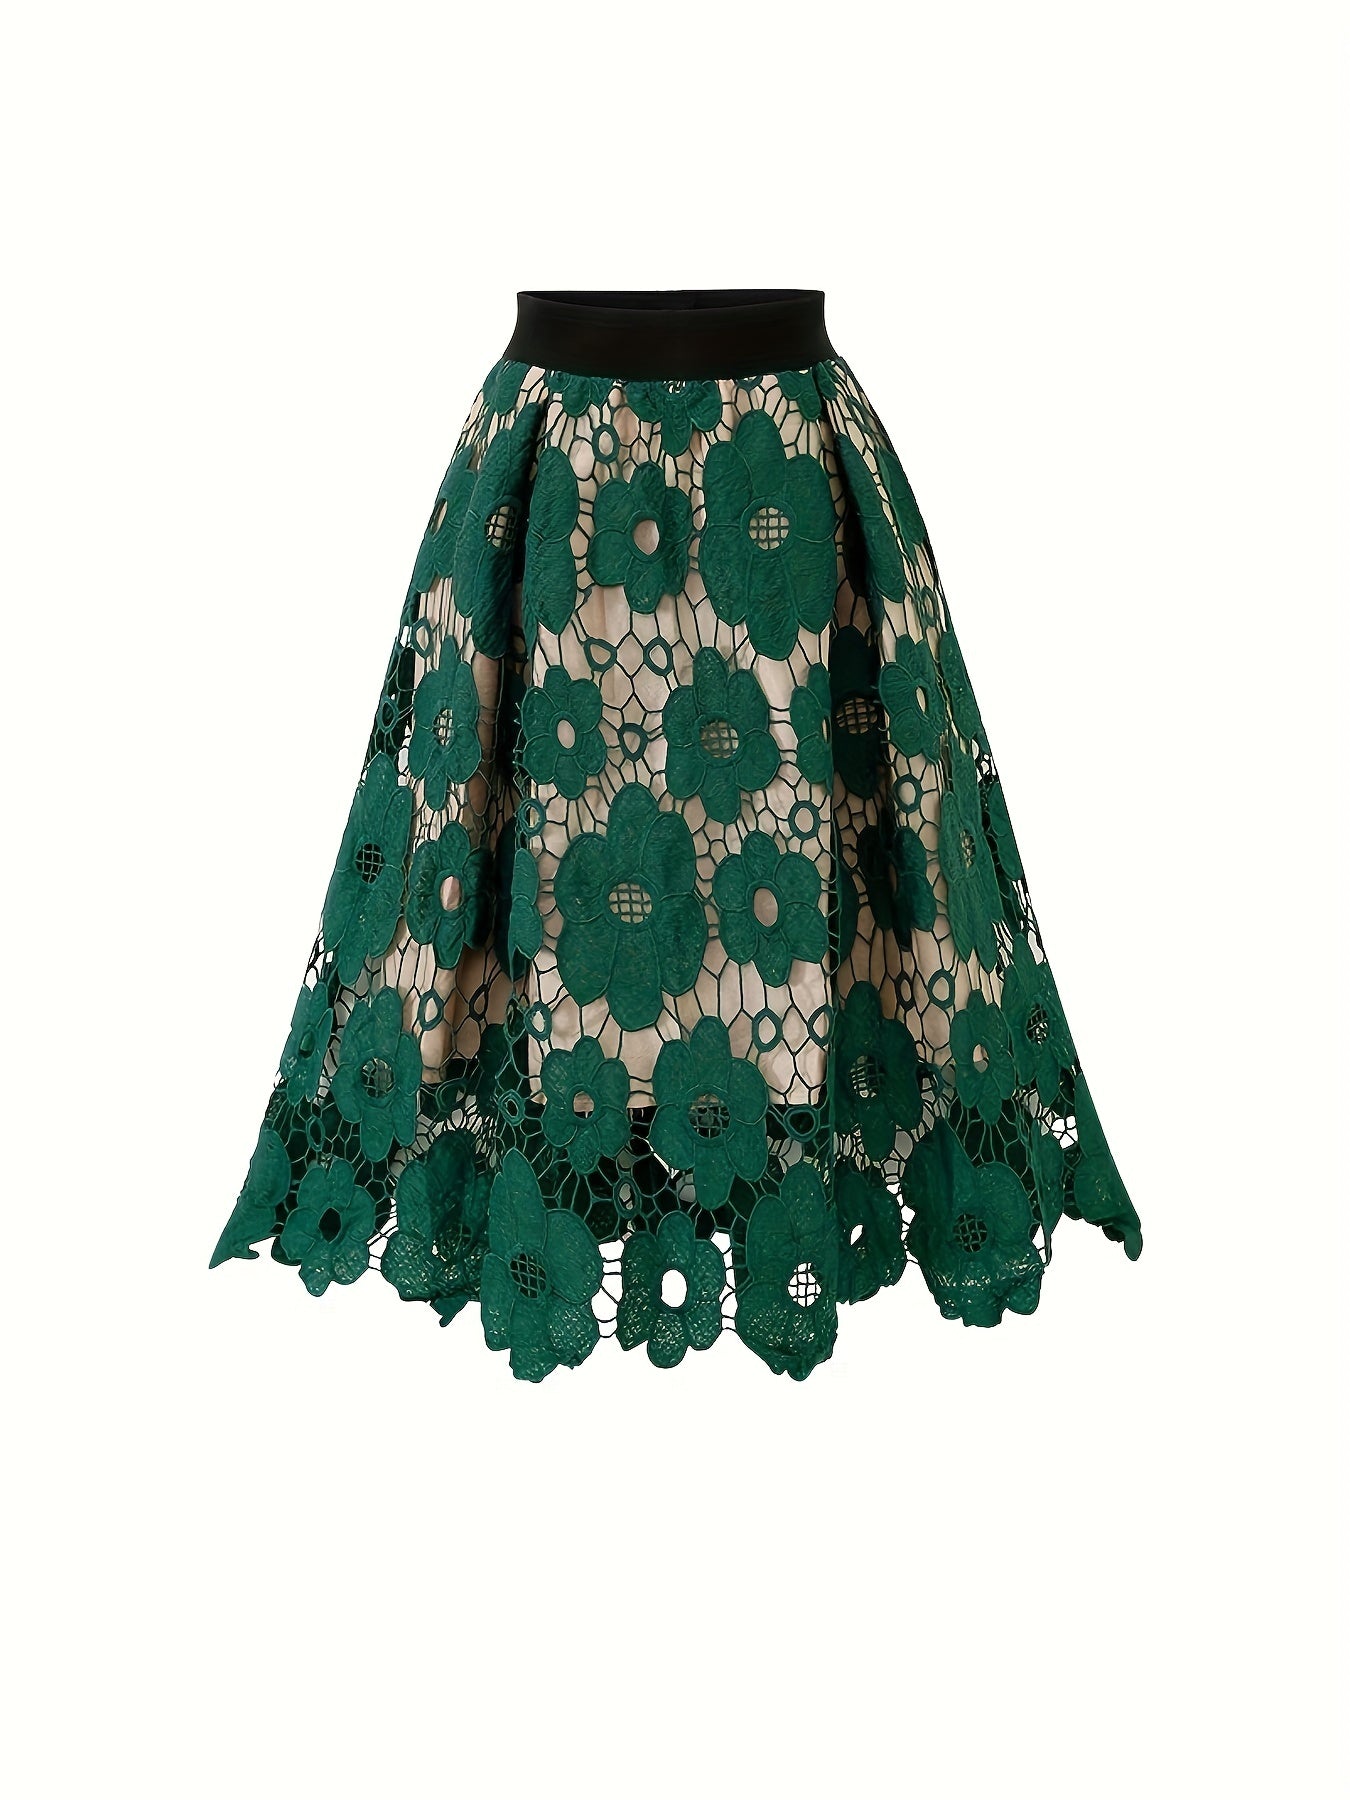 Guipure Lace Midi Skirts, Elegant High Waist Floral Pattern Skirts, Women's Clothing